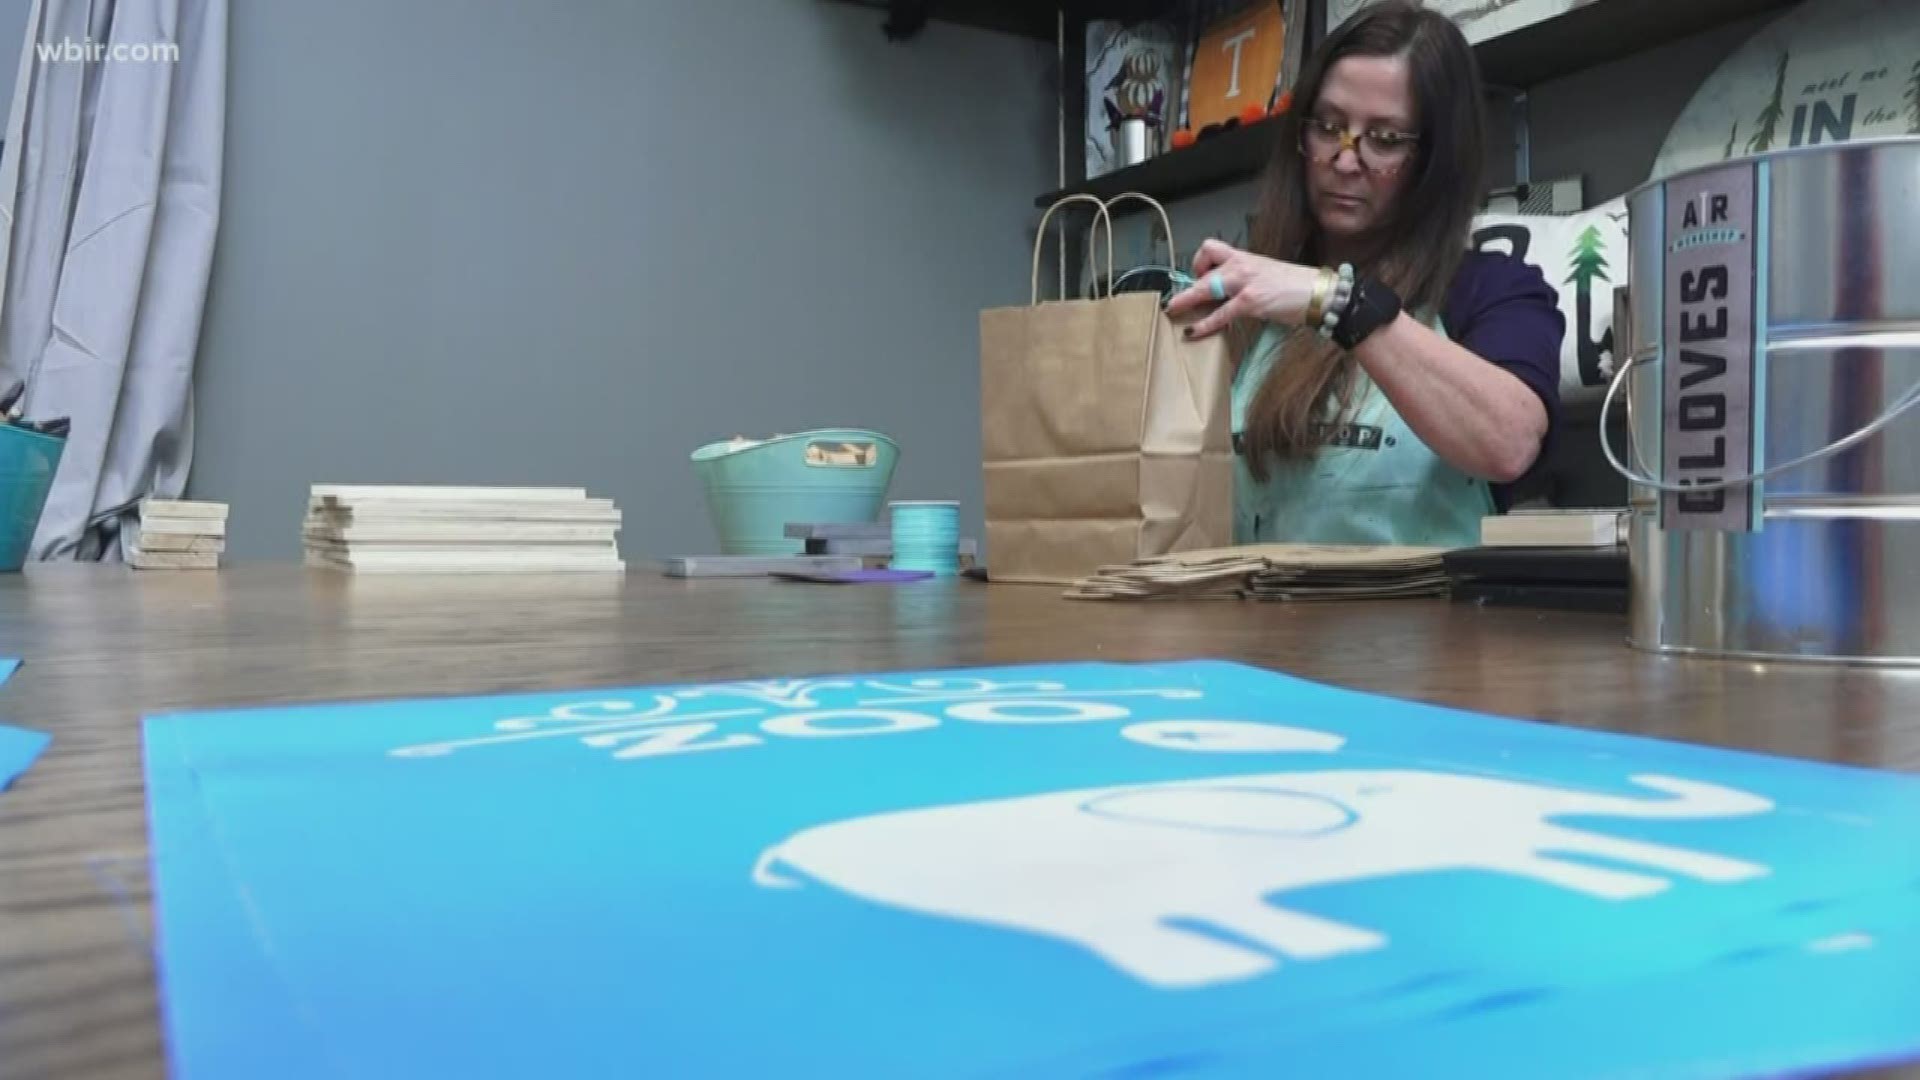 Amy Thomas owns AR Workshop. She hopes the bags will keep families entertained and her business afloat.